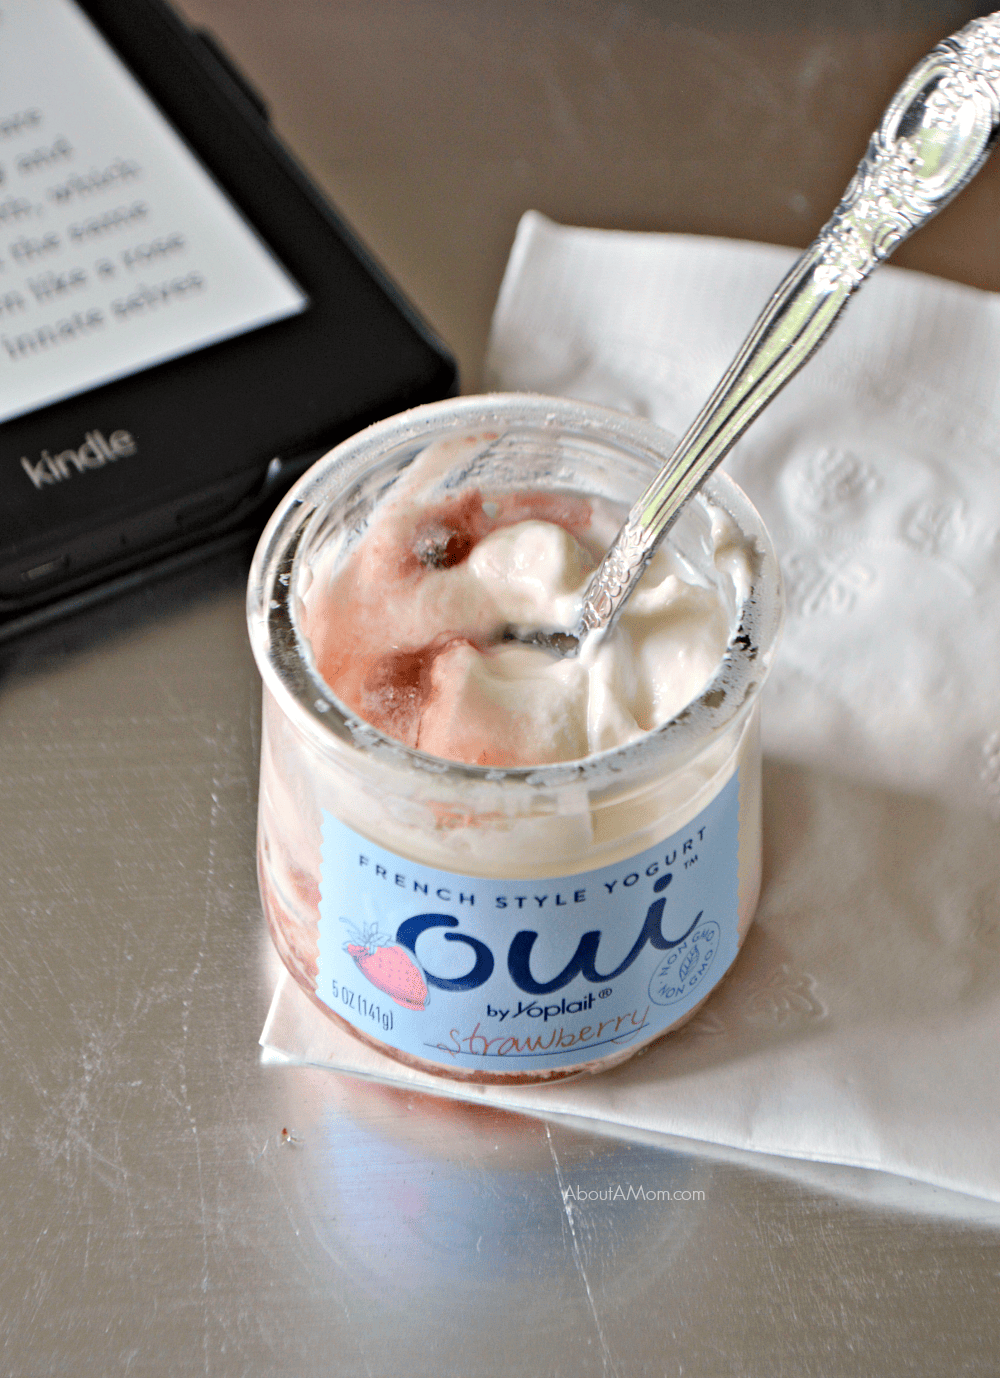 Self-care is an important part of motherhood. Grab a special treat like Oui by Yoplait and unwind while listening to this Me Time playlist.